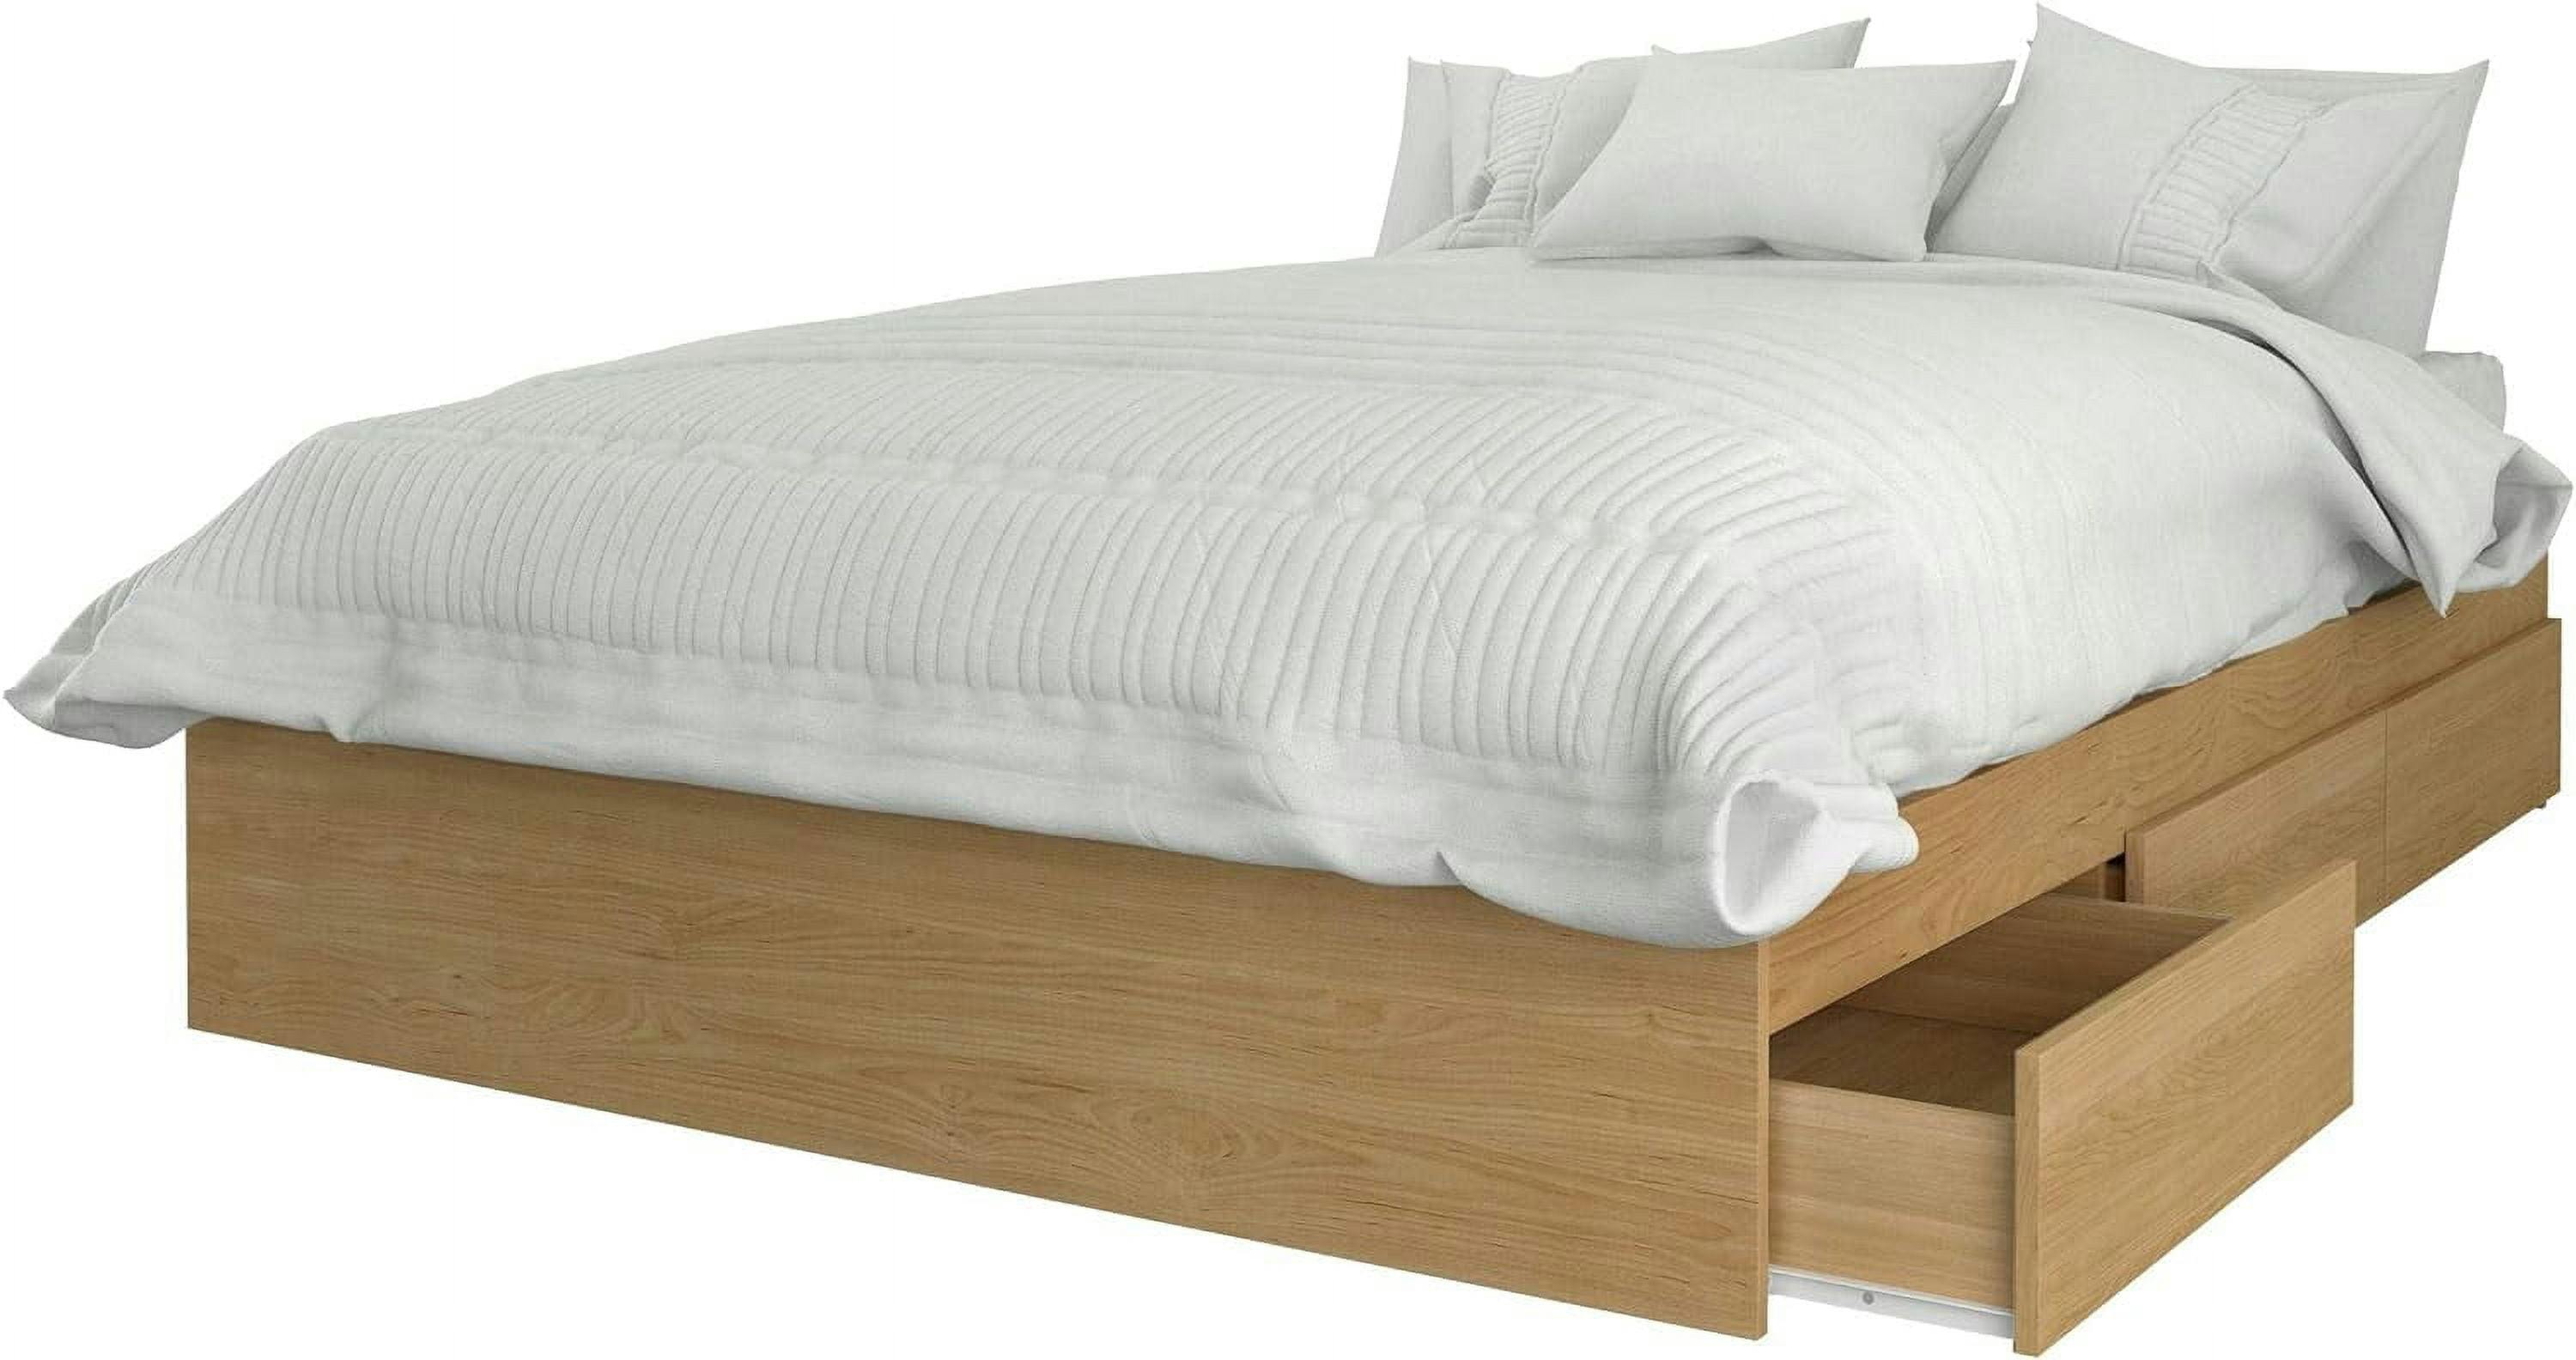 Natural Maple Full Double Bed with 3 Storage Drawers and Wood Frame